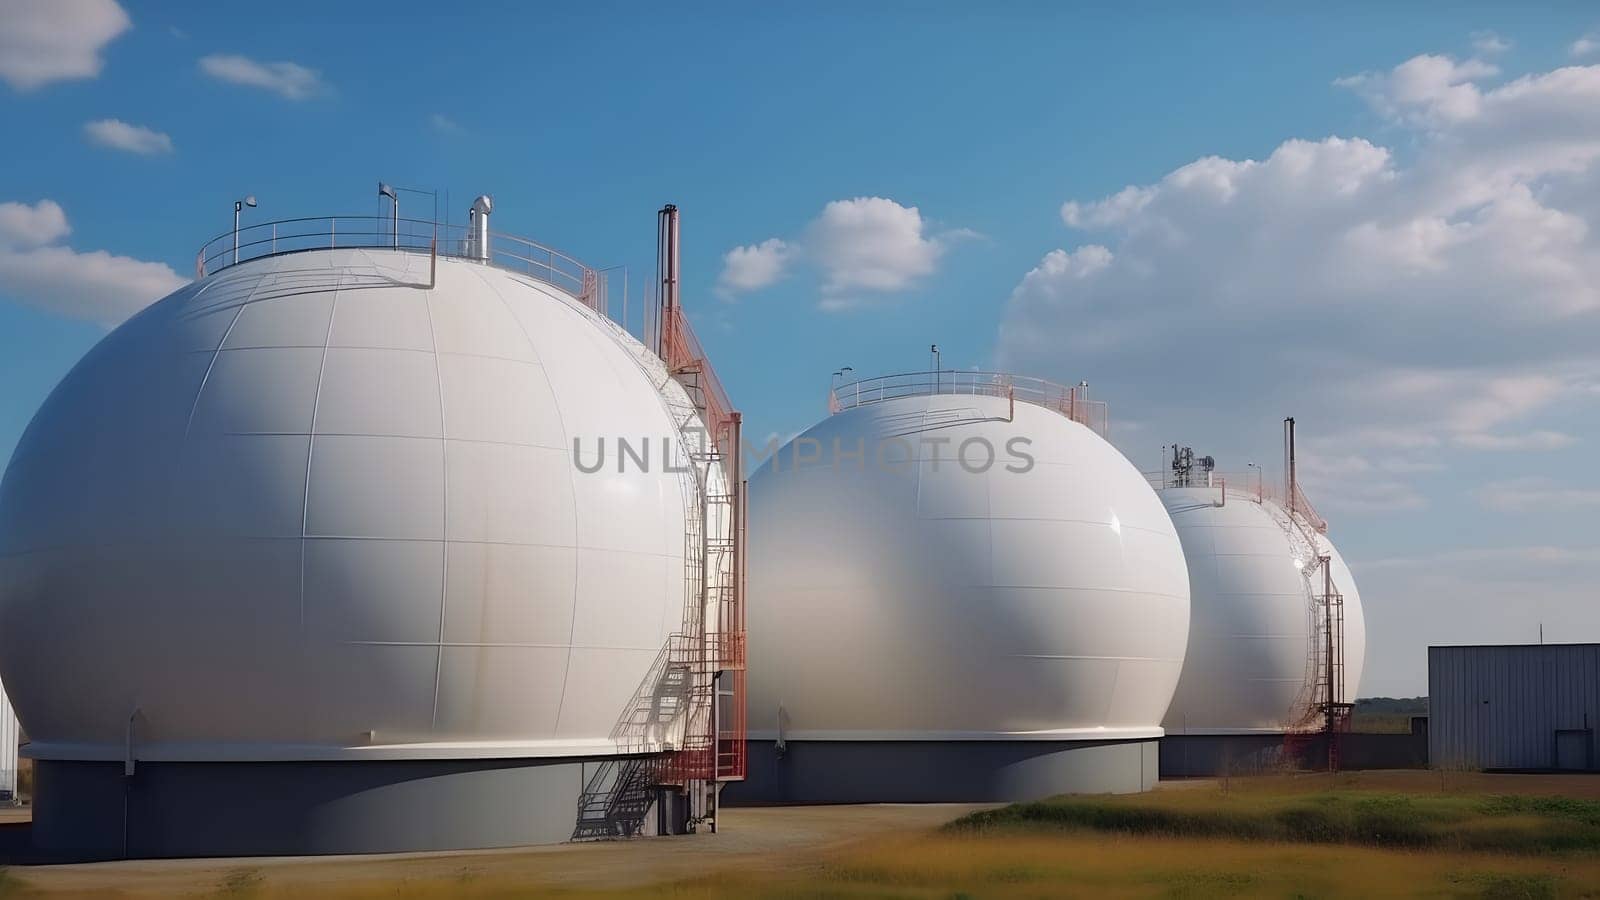 white spherical tanks for storing hydrogen gas at outdoor storage facility, neural network generated image by z1b